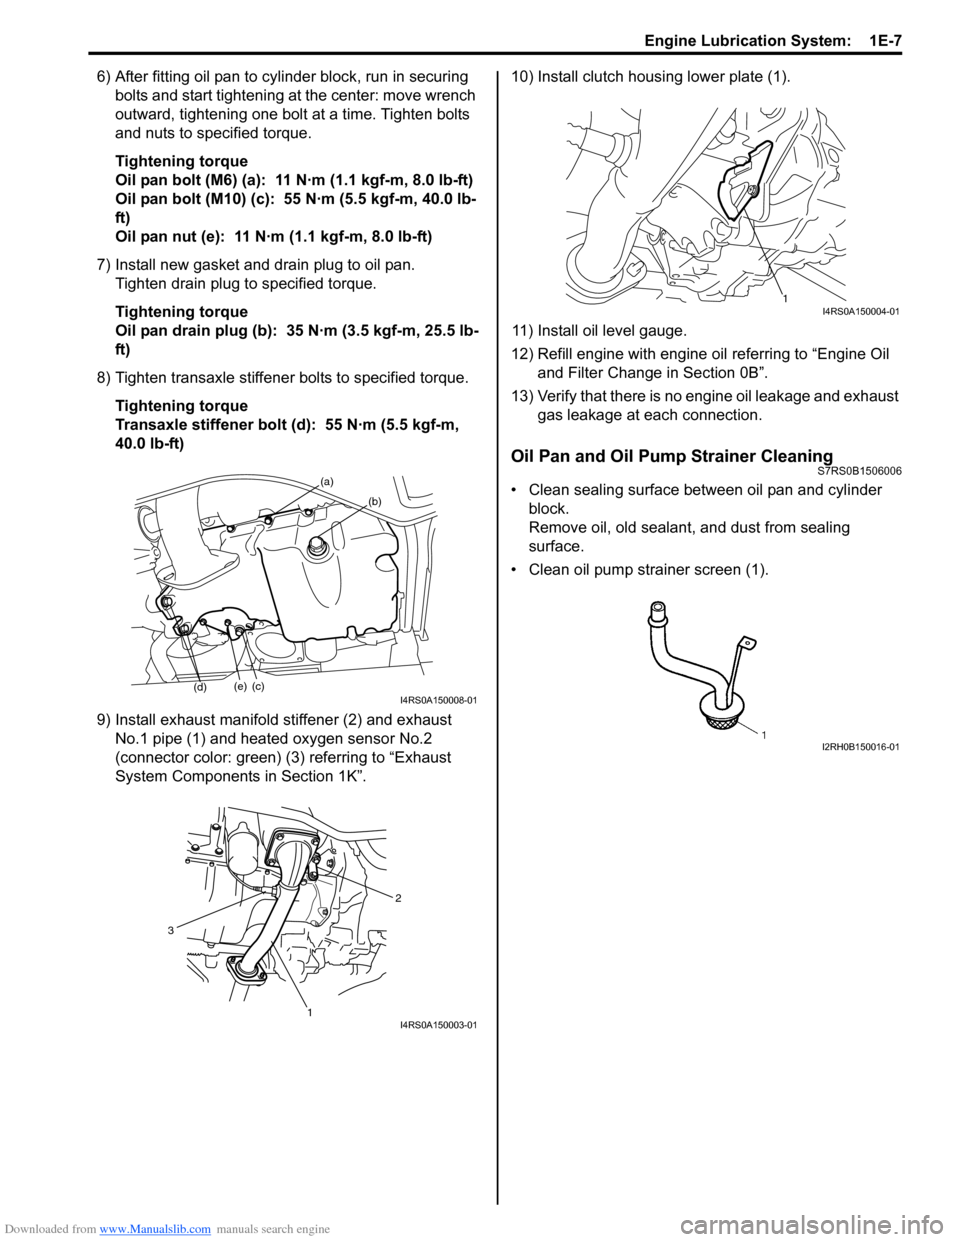 SUZUKI SWIFT 2006 2.G Service Workshop Manual Downloaded from www.Manualslib.com manuals search engine Engine Lubrication System:  1E-7
6) After fitting oil pan to cylinder block, run in securing bolts and start tightening at the center: move wre